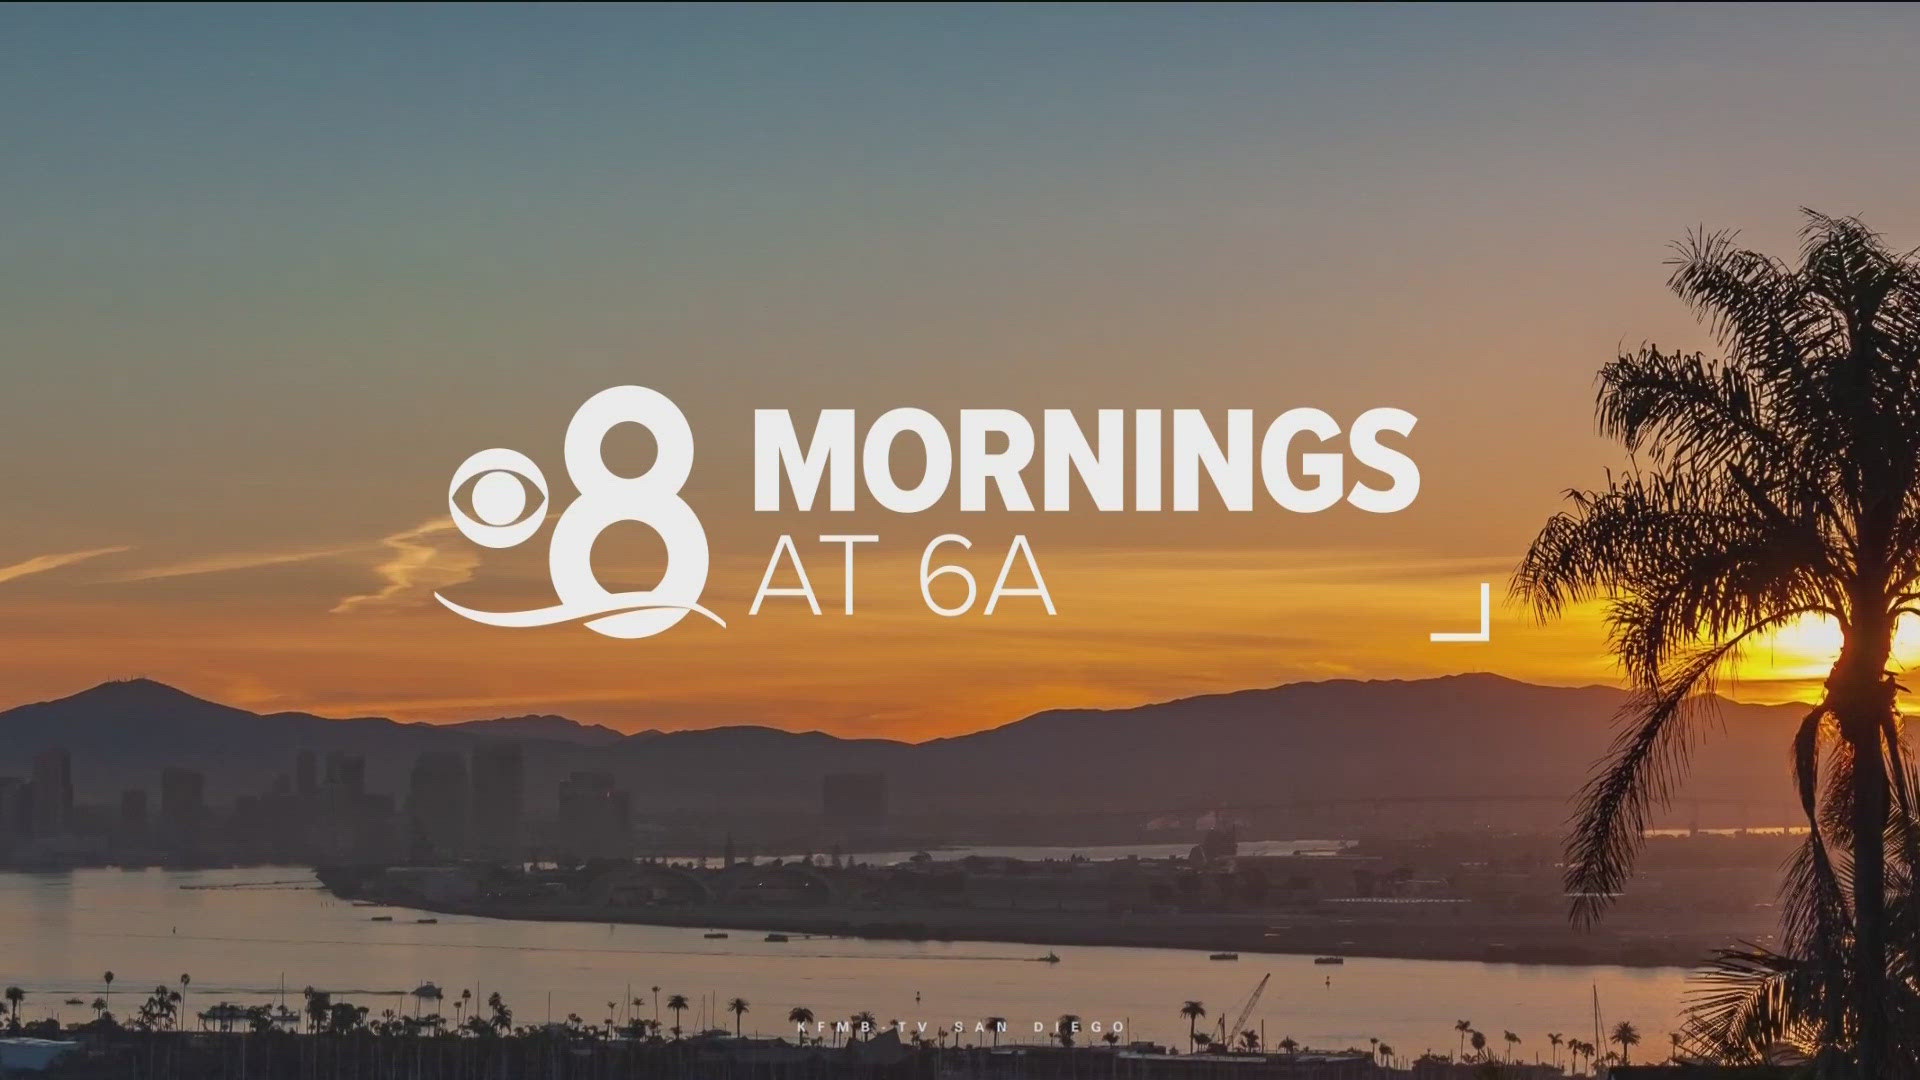 Here are the top stories around San Diego County for the morning of Monday, July 1st.
For the latest news, weather and sports, head to:
https://www.cbs8.com/